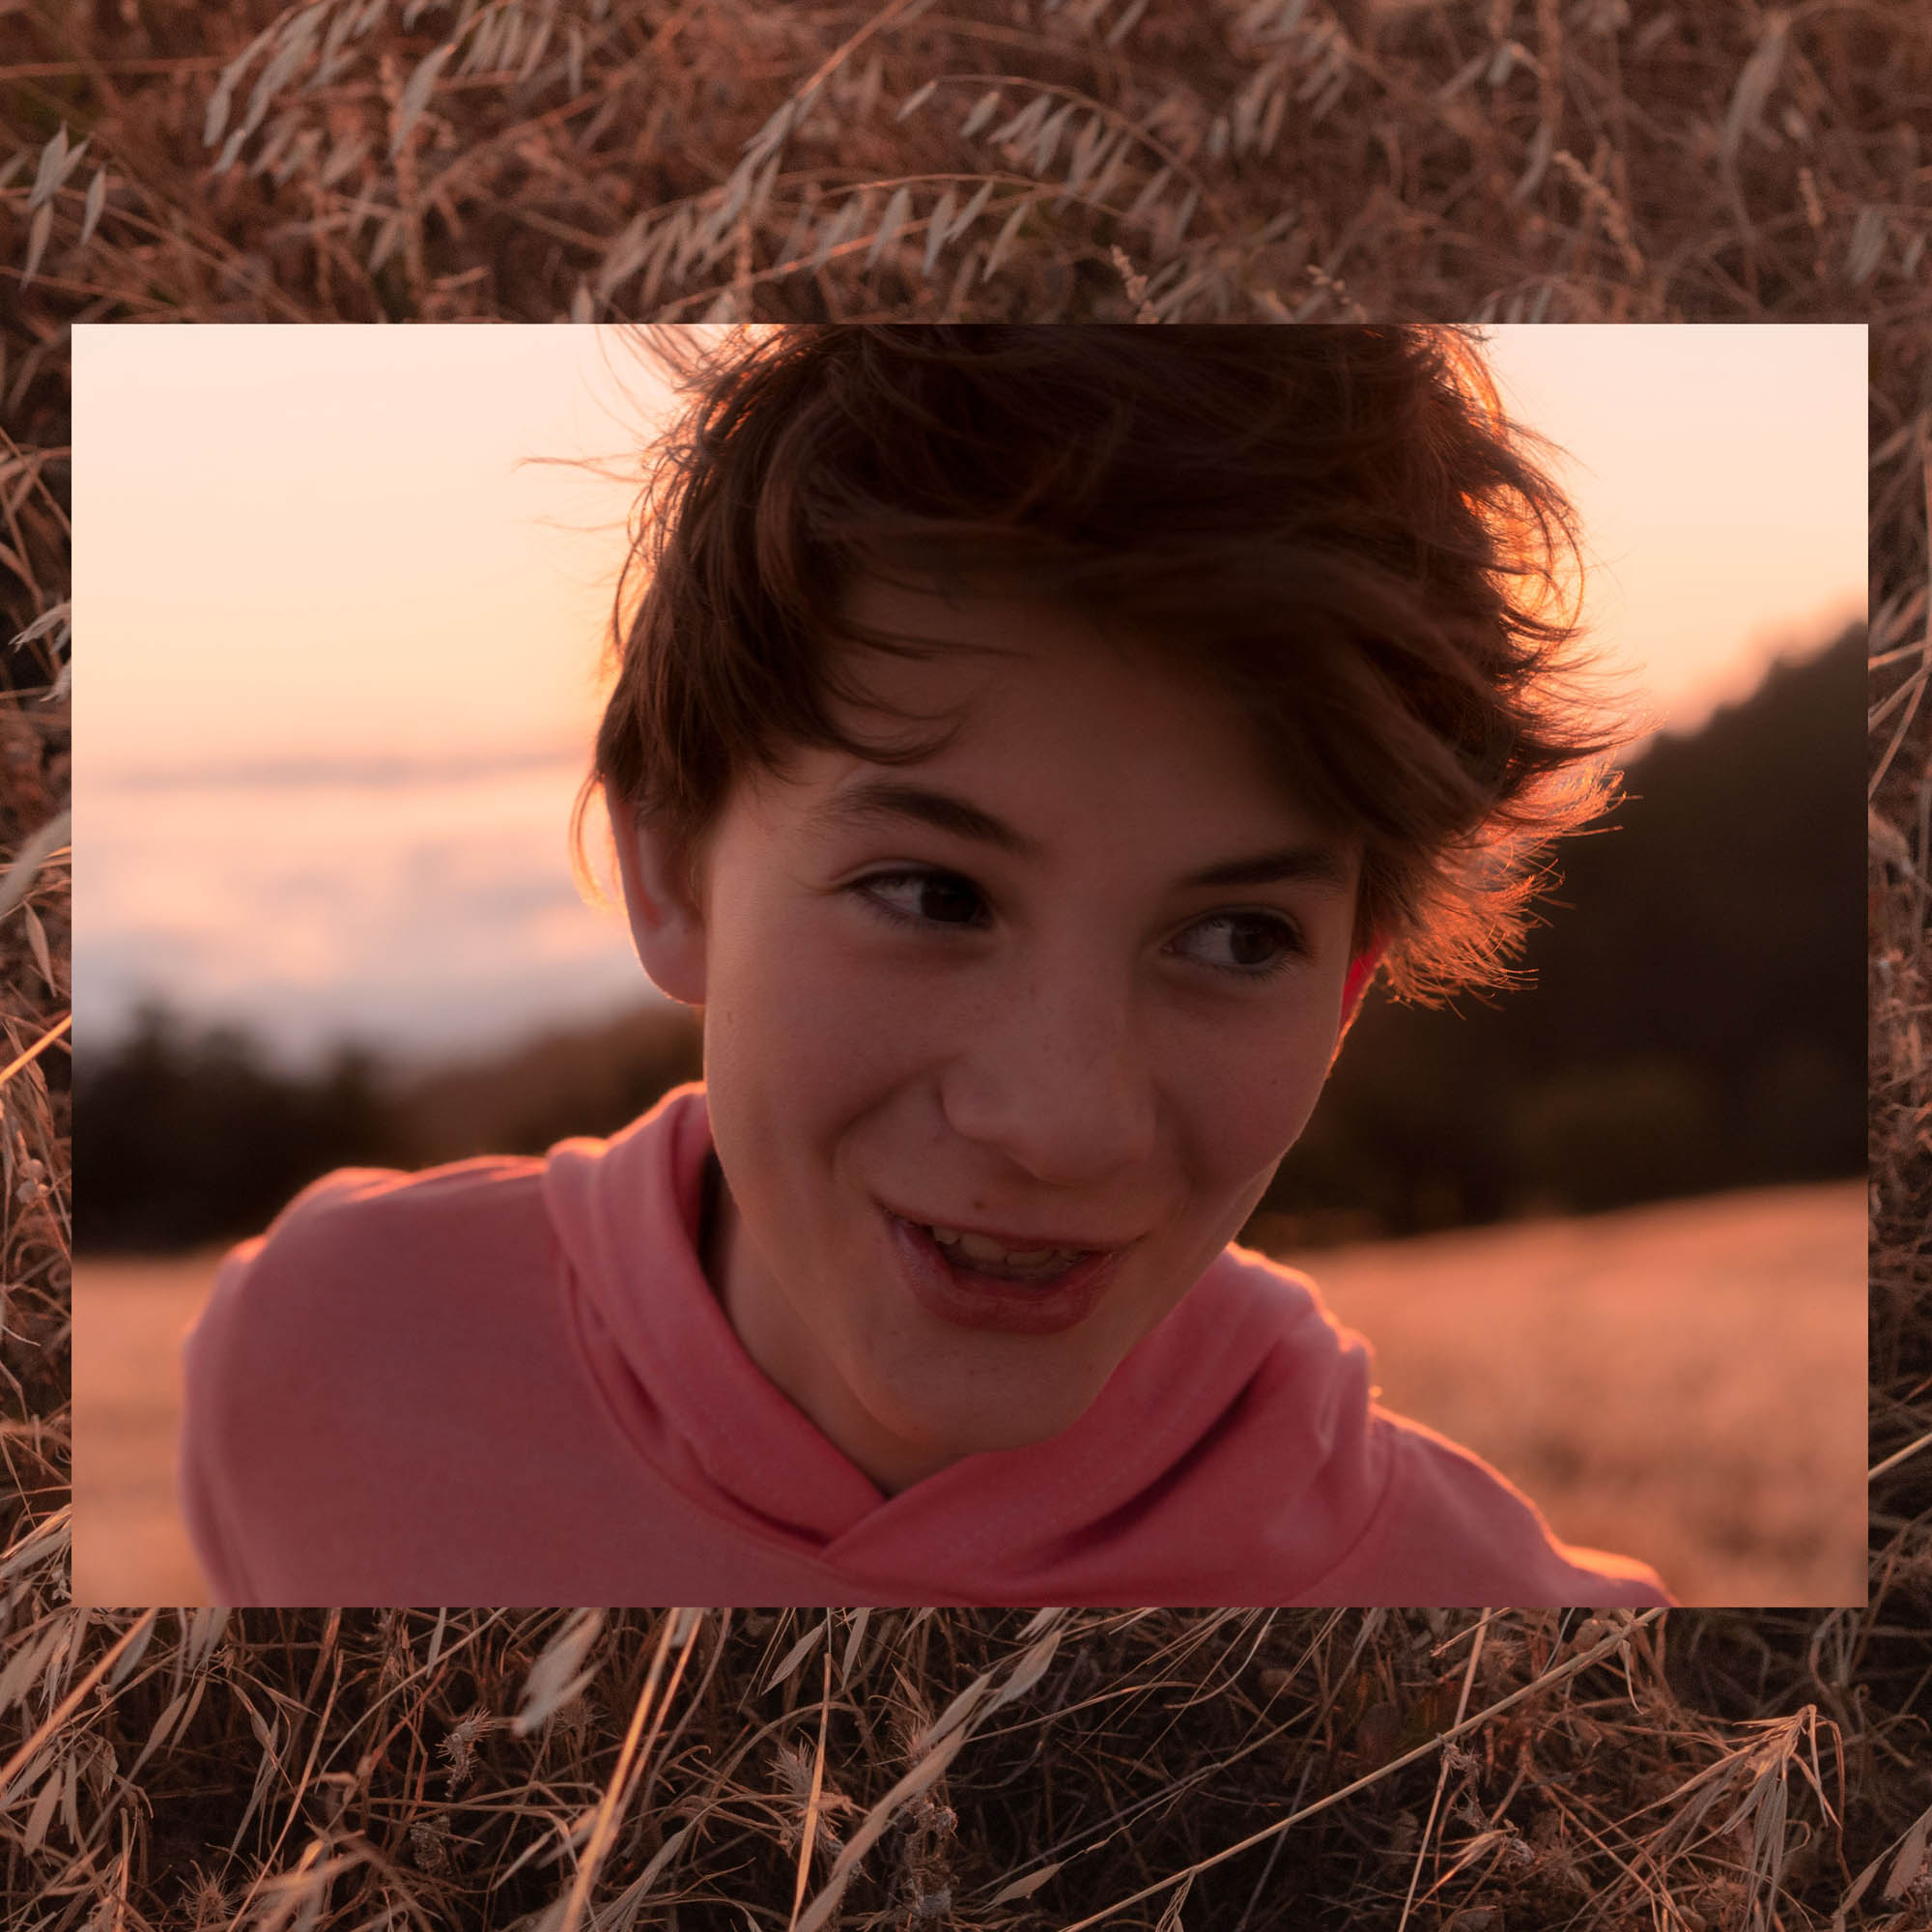 Boy smiling at sunset a top a mountain